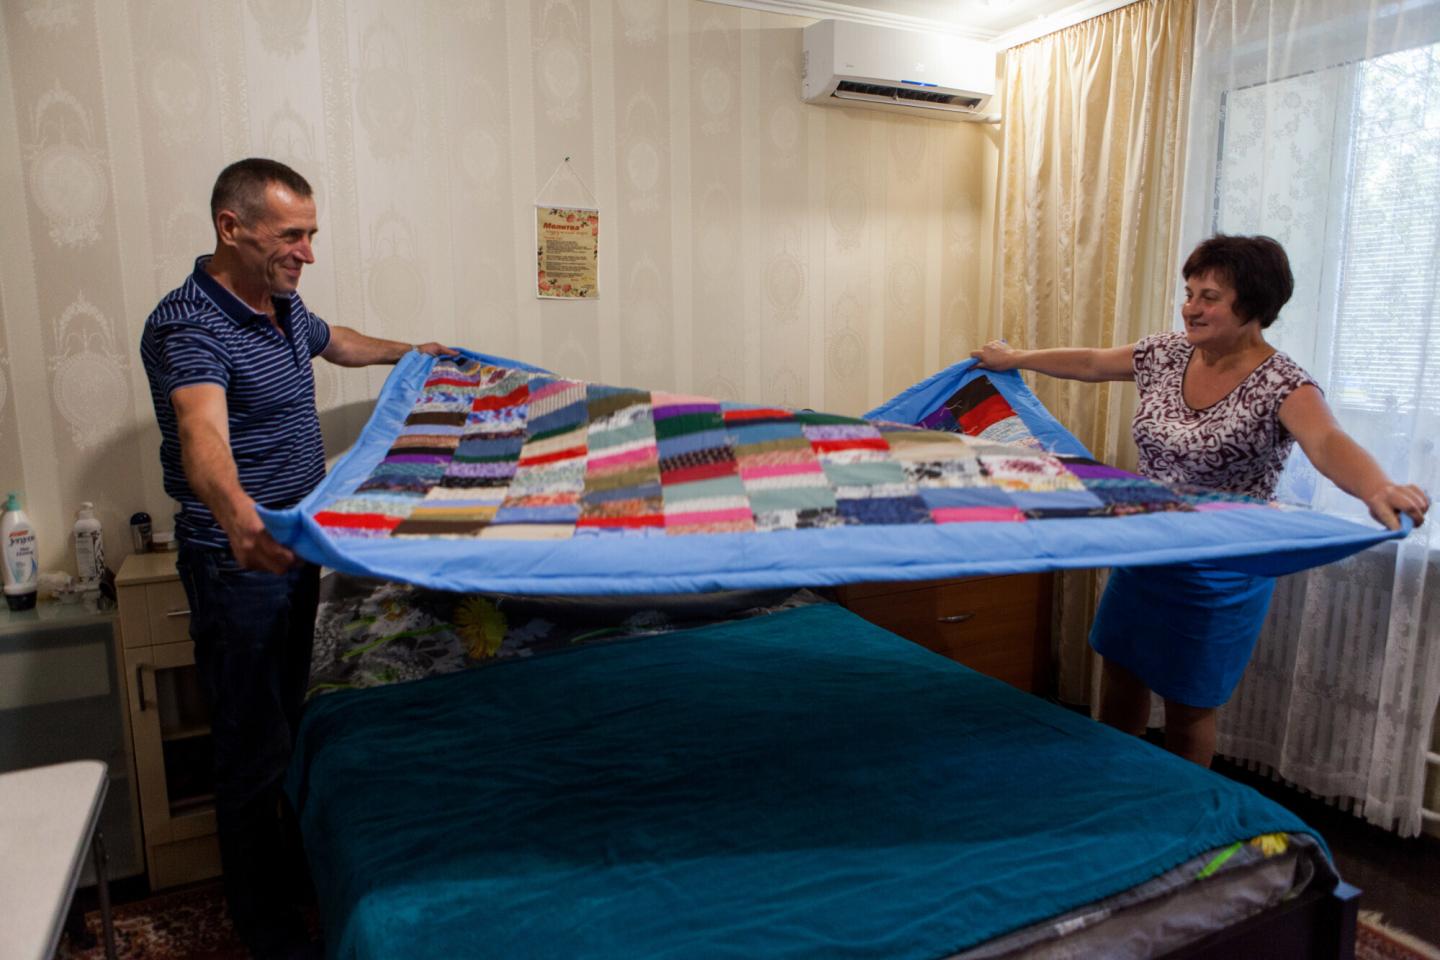 A Ukrainian man and woman work together to put a colorful comforter on a bed